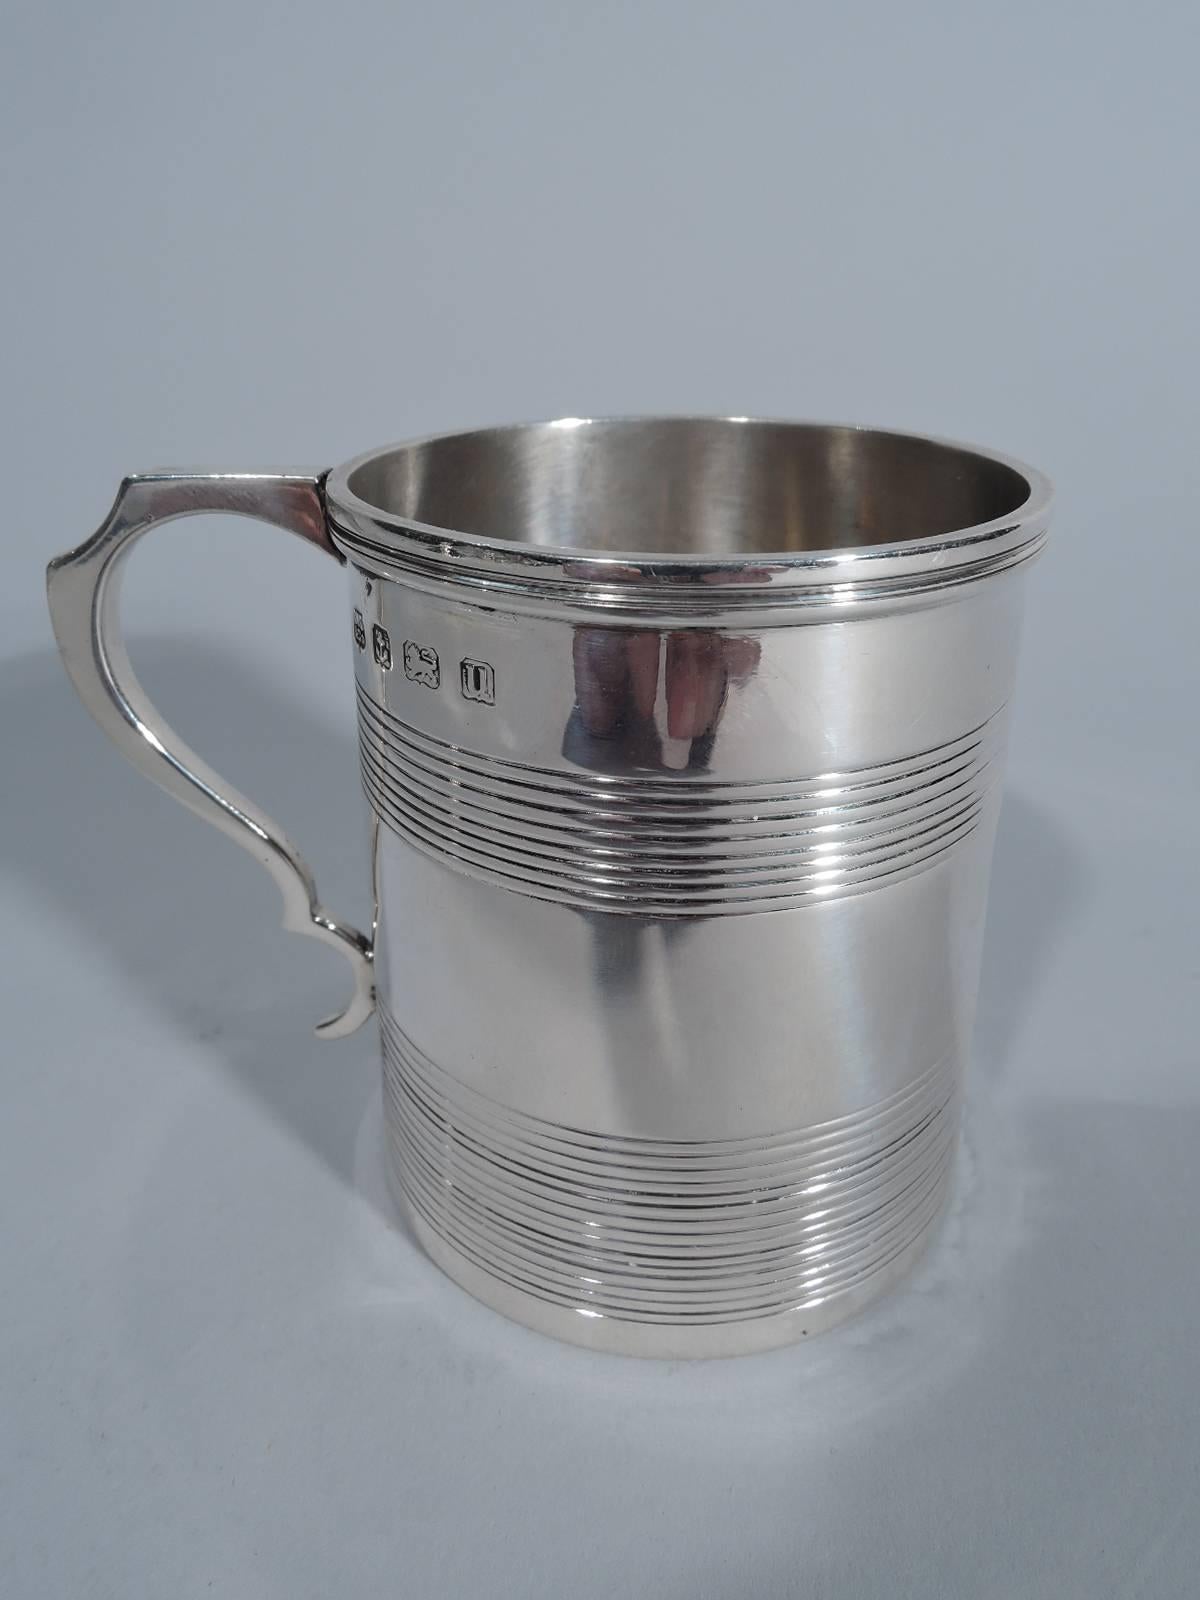 George V sterling silver baby cup. Made by Samuel Walton Smith in Birmingham in 1919. Straight and upward tapering sides, molded rim, and double-scroll handle. Plain with two reeded bands. Lots of room for engraving.

Dimensions: H 2 5/8 x W 3 1/8